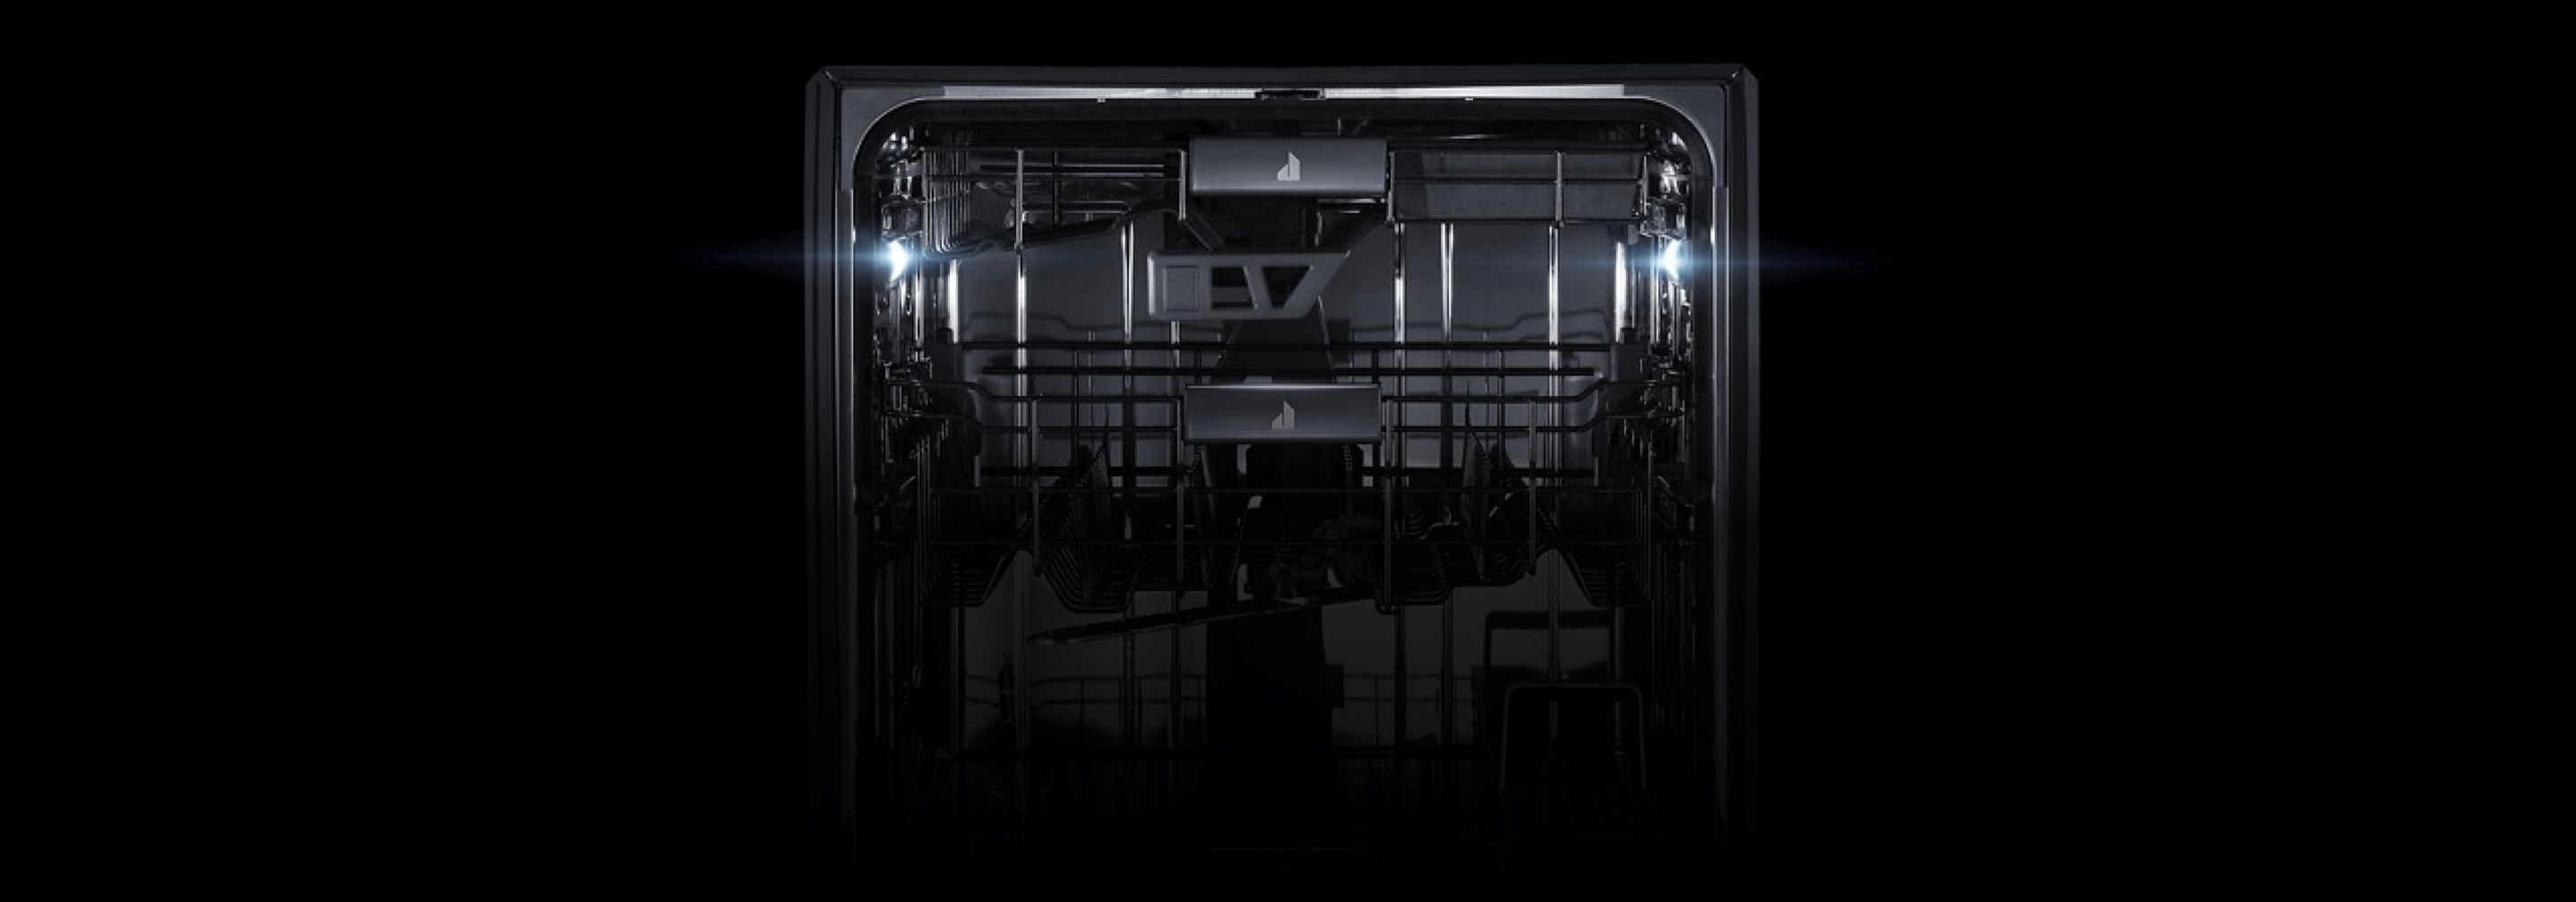 The interior of a JennAir® Dishwasher, focusing on the top two racks.